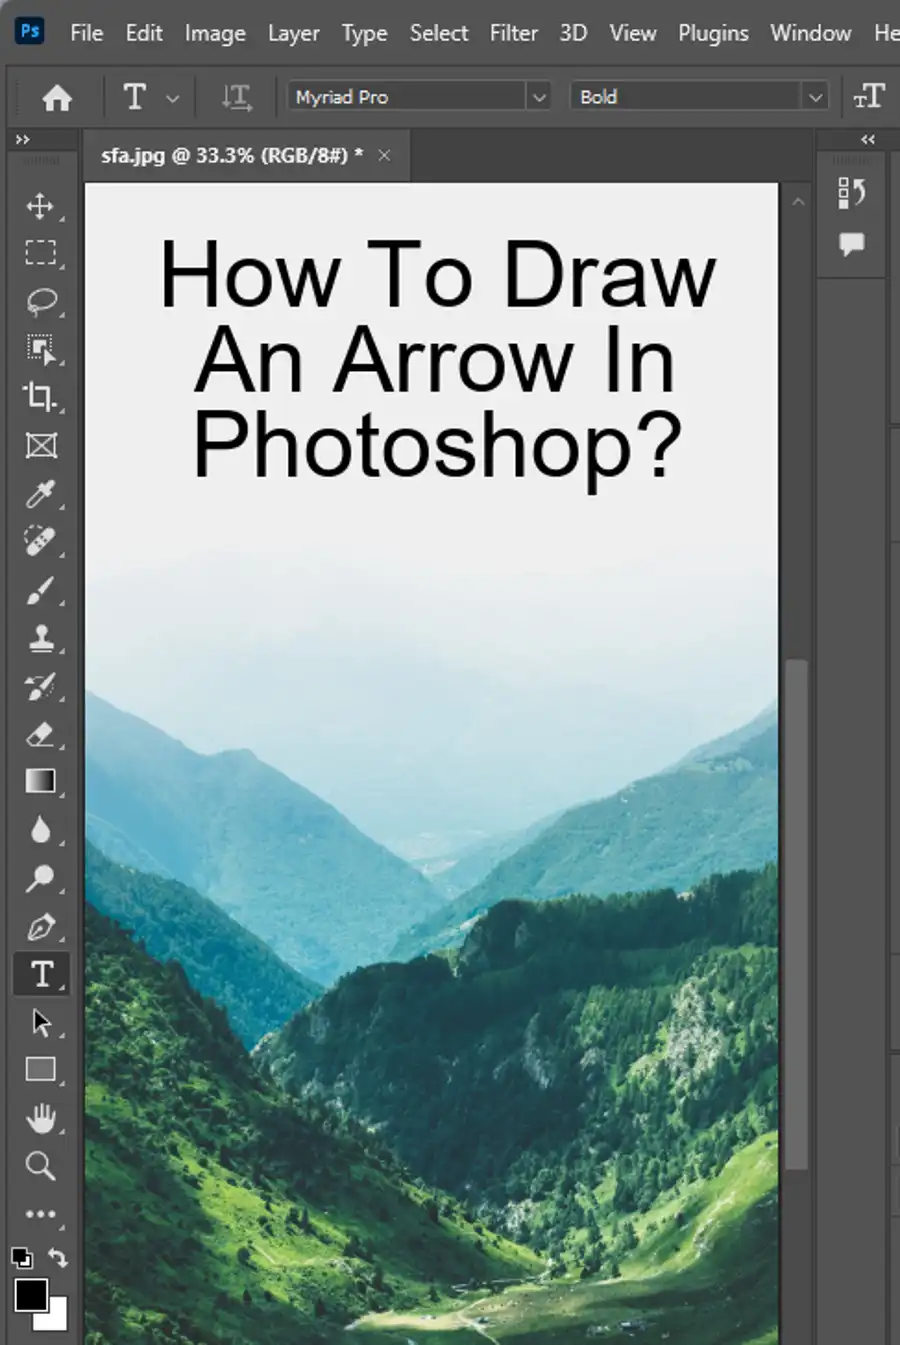 How to Draw an Arrow in